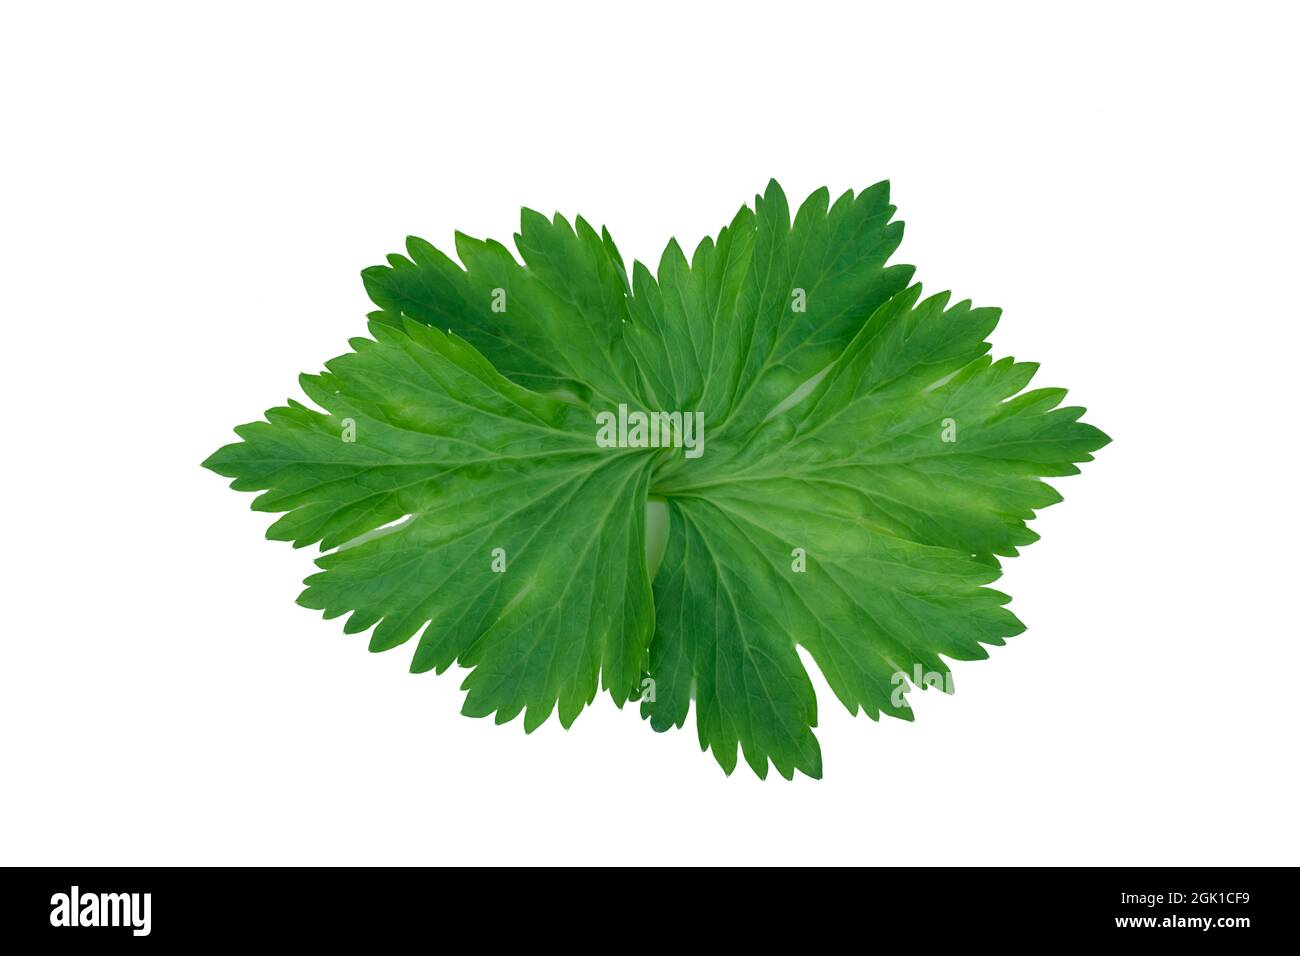 Parsley leaves close-up isolate on a white background Stock Photo